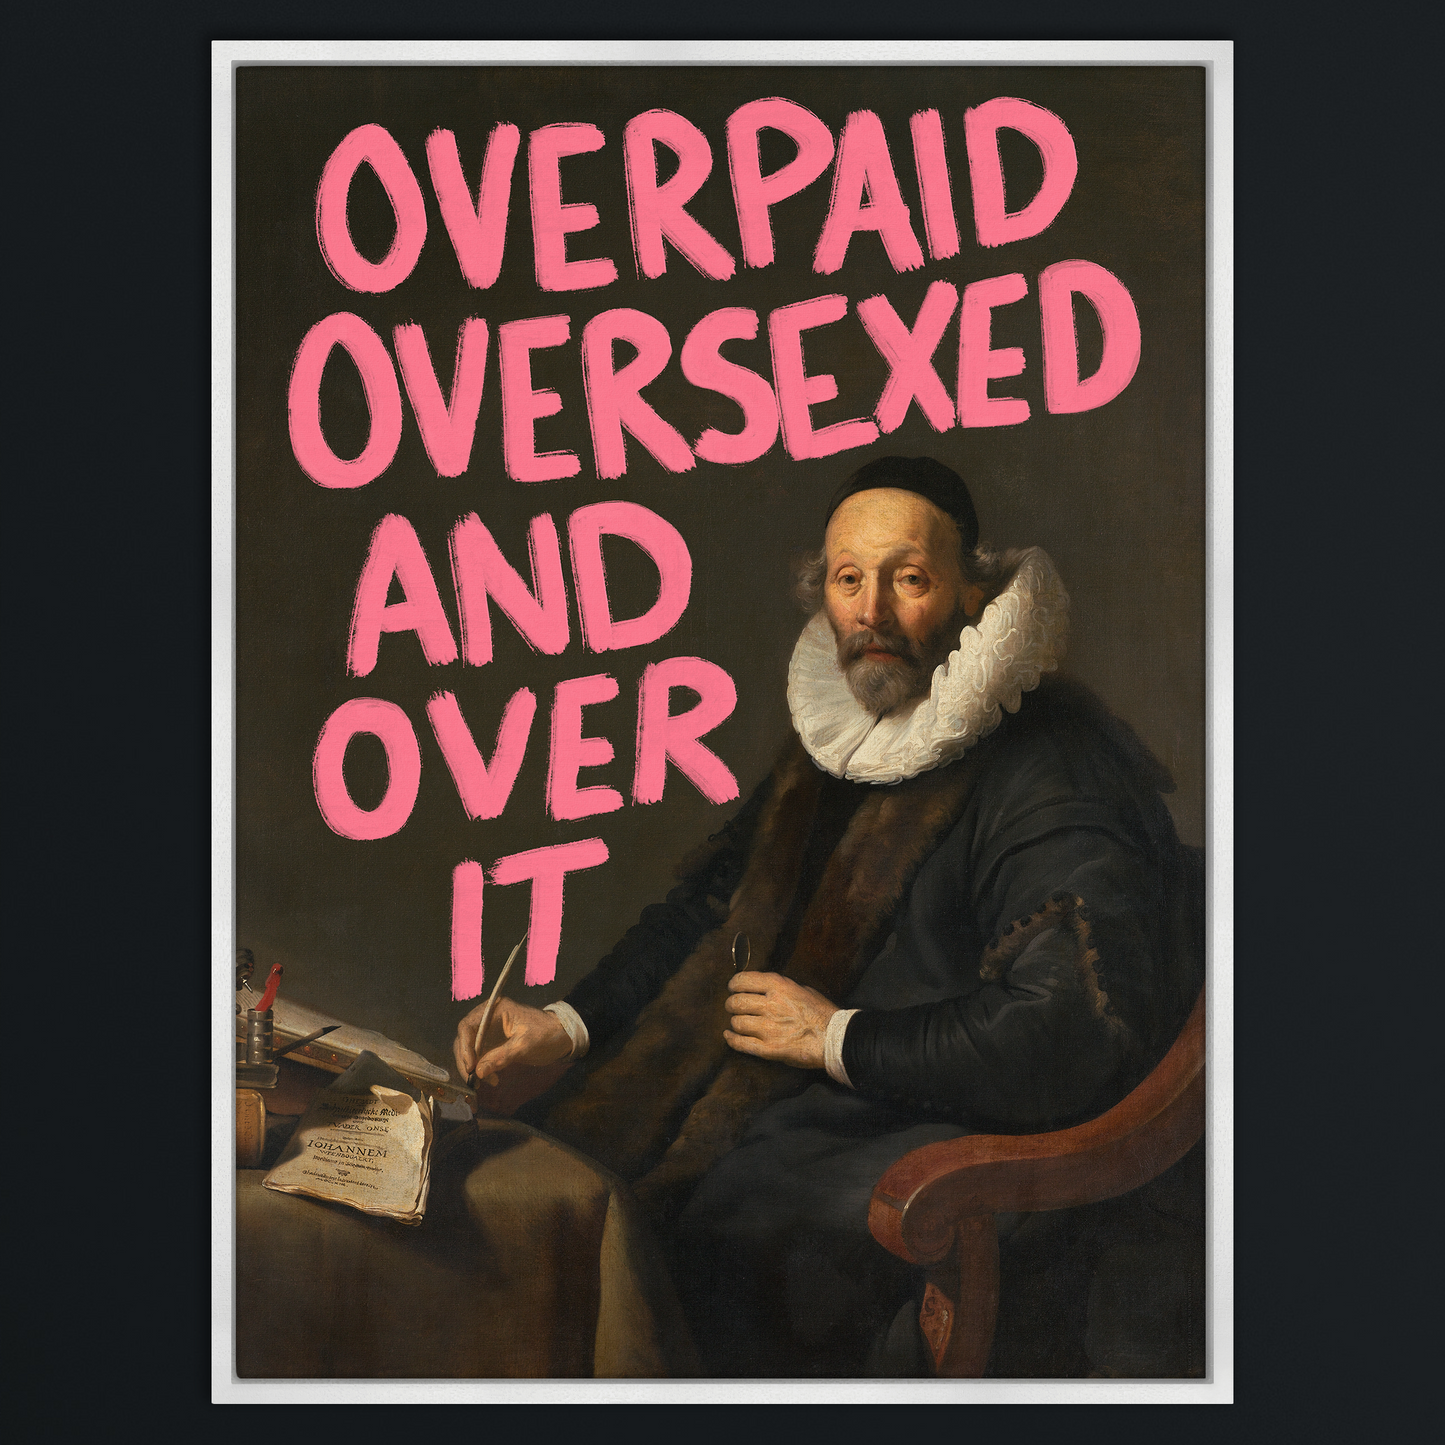 Overpaid, Oversexed and Over It - Canvas Print